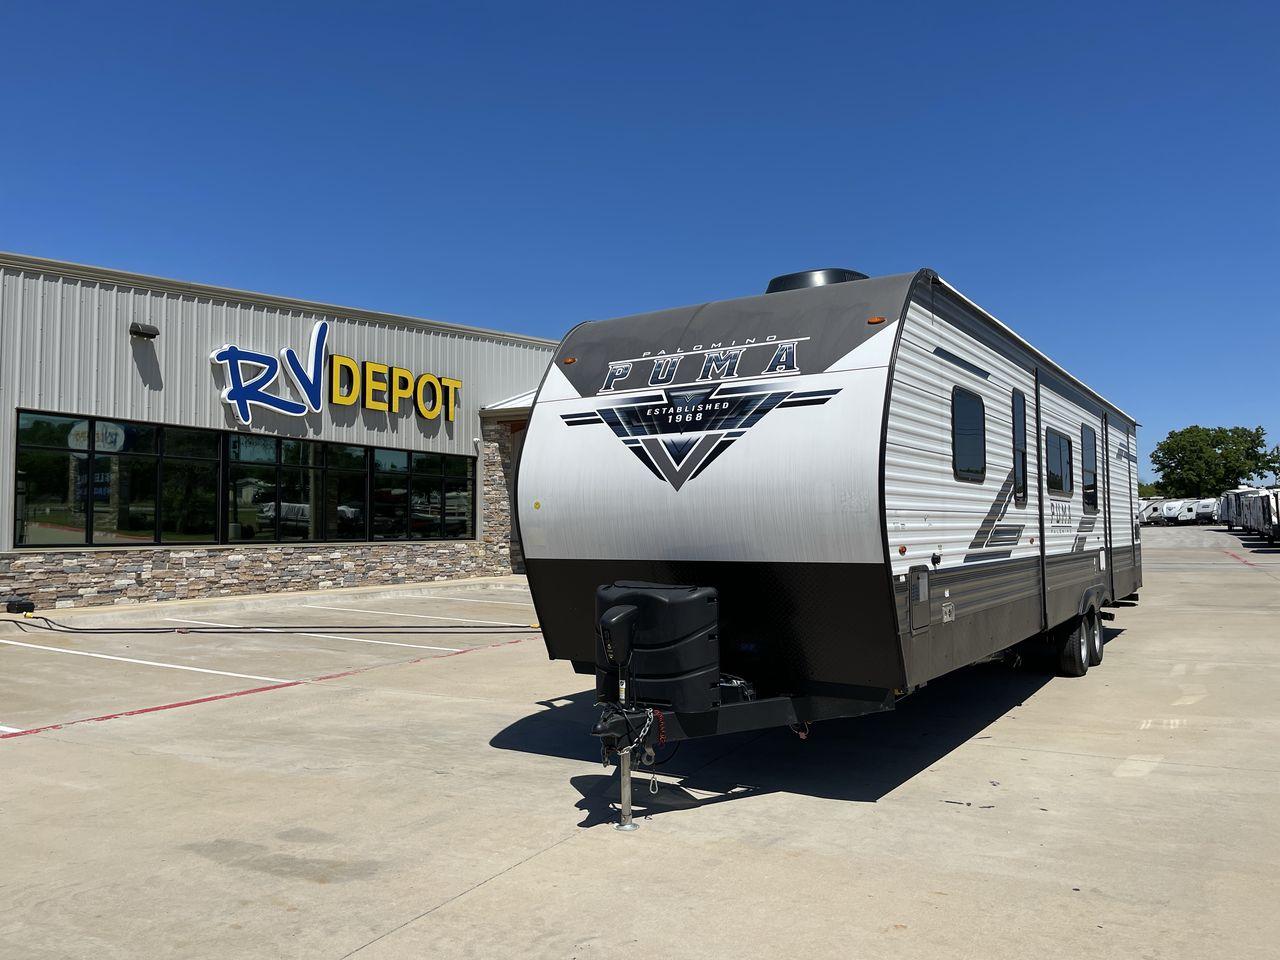 2023 FOREST RIVER PUMA 32BH2B (4X4TPUH21PP) , Length: 38.5 ft. | Dry Weight: 9,023 lbs. | Gross Weight: 11,230 lbs | Slides: 3 transmission, located at 4319 N Main St, Cleburne, TX, 76033, (817) 678-5133, 32.385960, -97.391212 - With its ample space and adaptability, the 2023 Palomino Puma 32BH2B travel trailer is perfect for hosting extended families and gatherings. This model provides generous living space while maintaining excellent maneuverability on the road. It measures 38.5 feet in length and has a dry weight of 9,02 - Photo #0